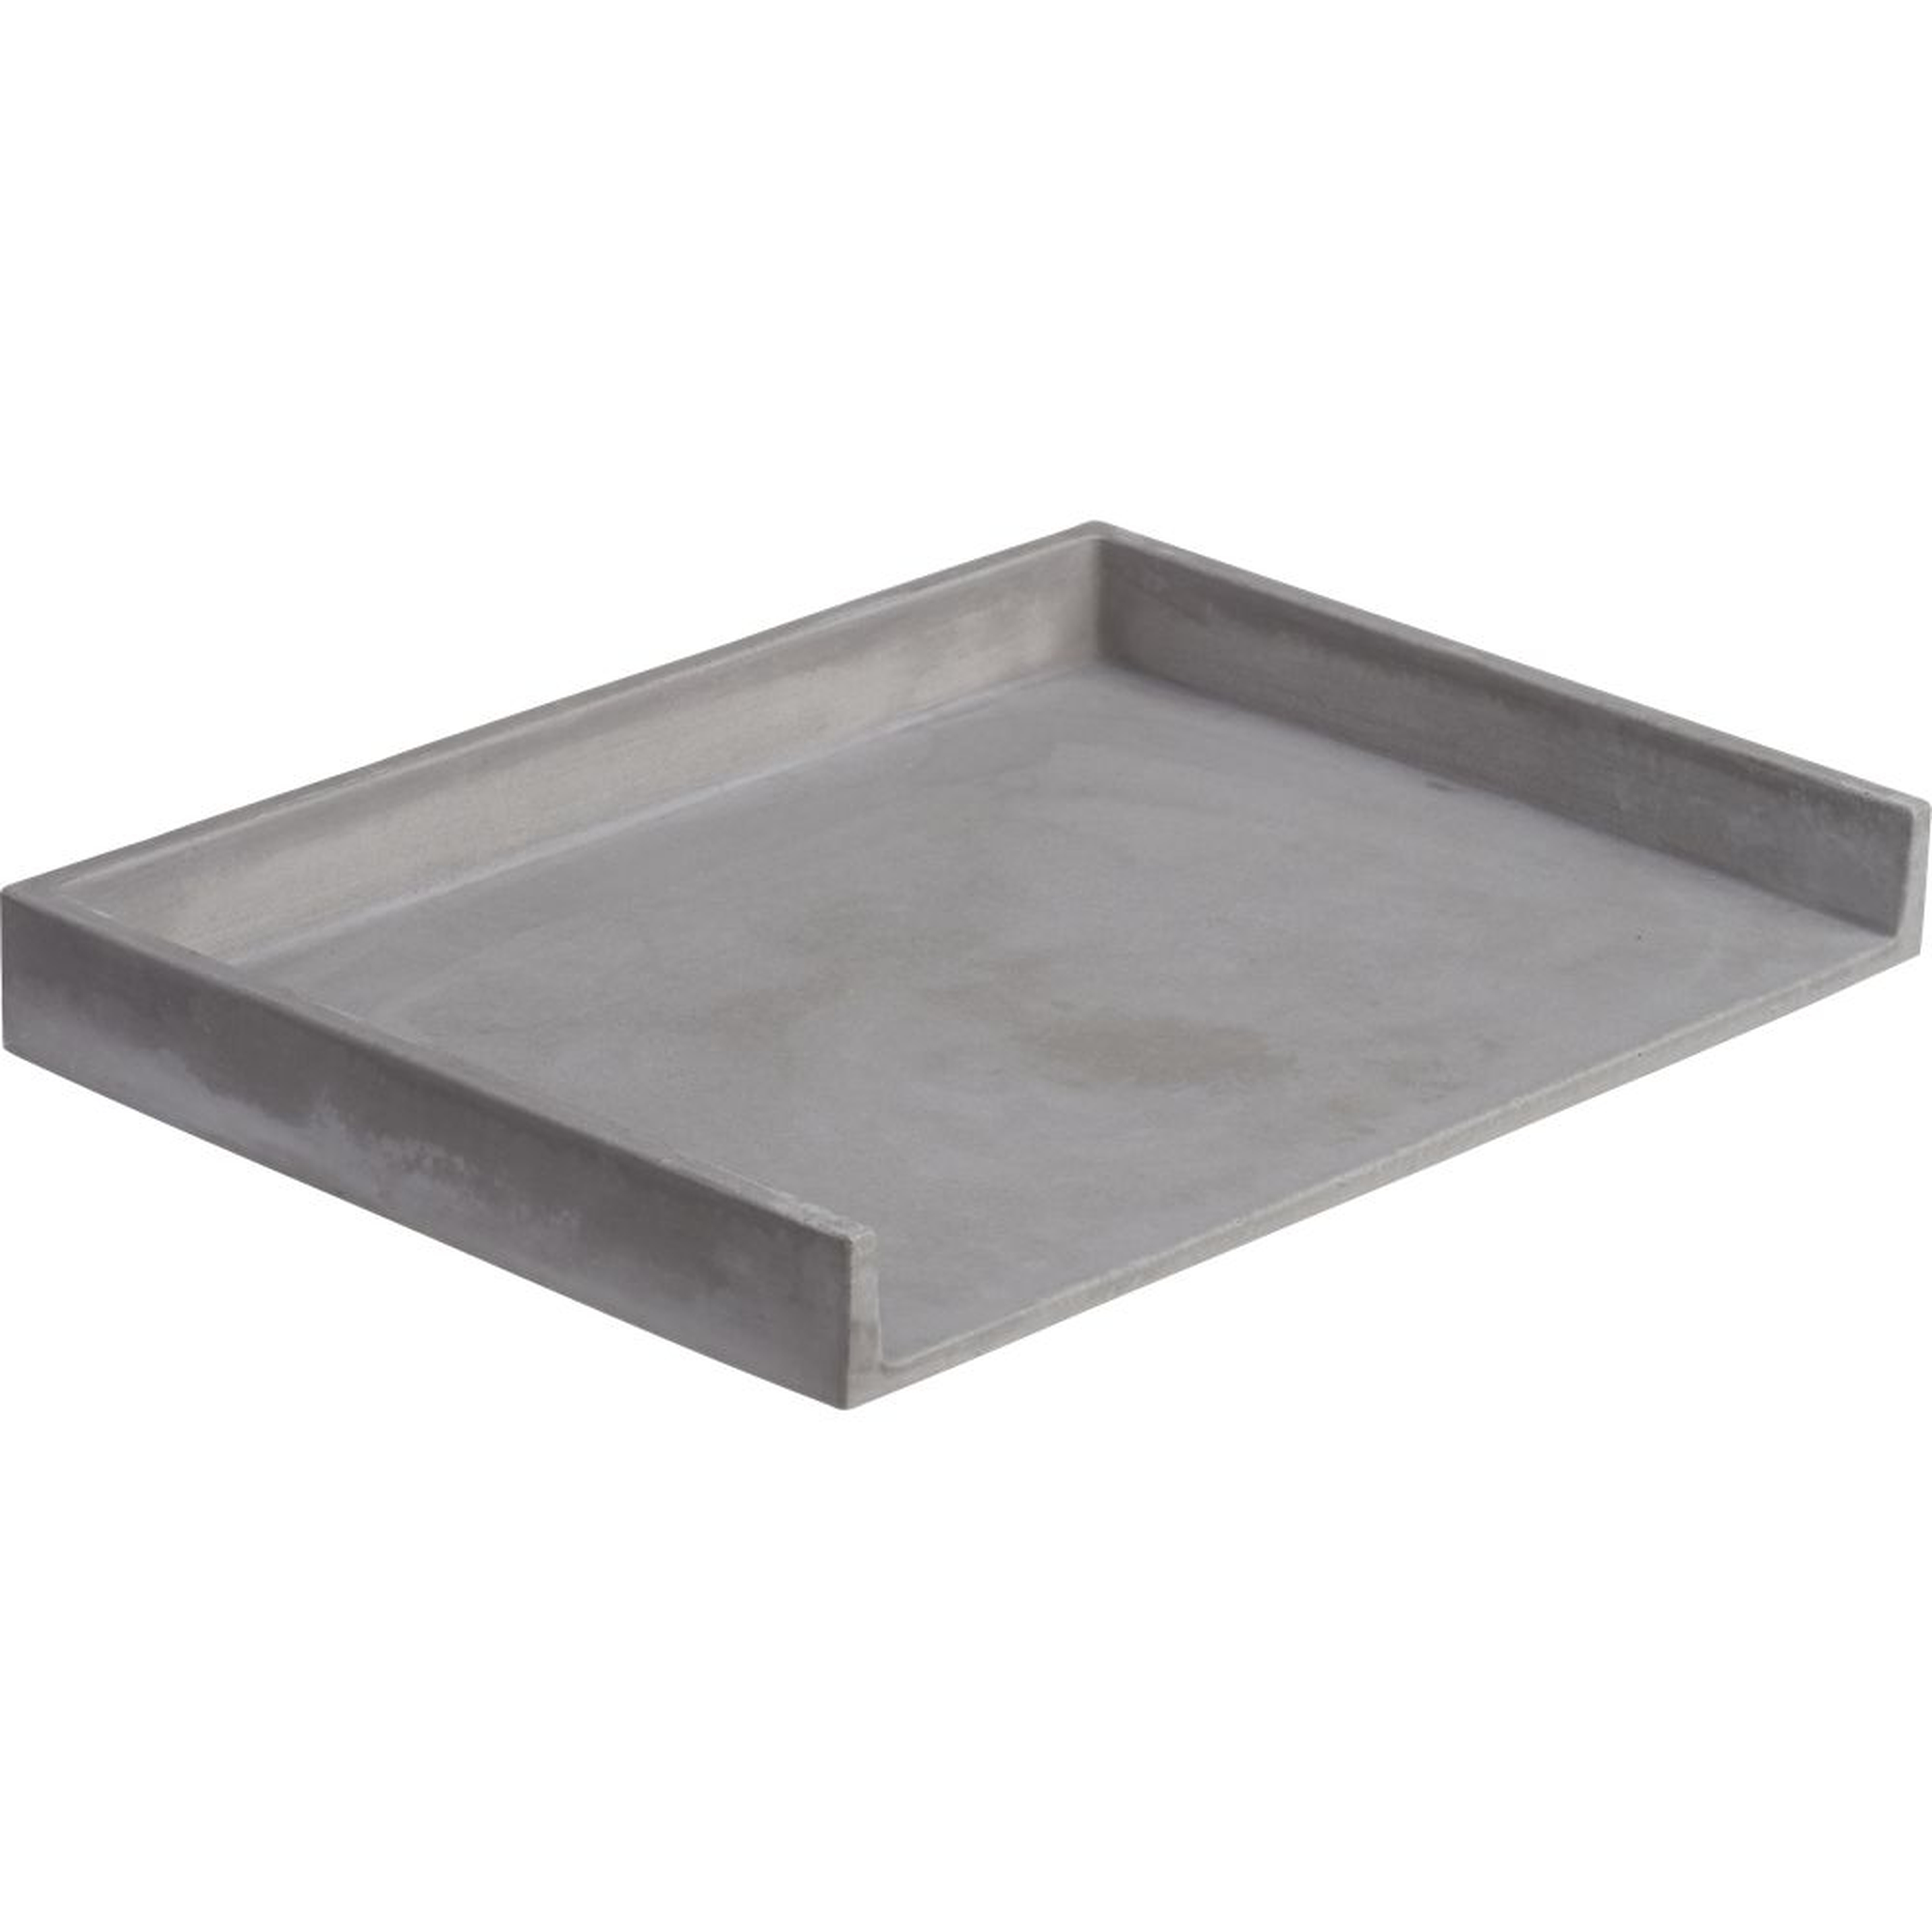 cement letter tray - CB2